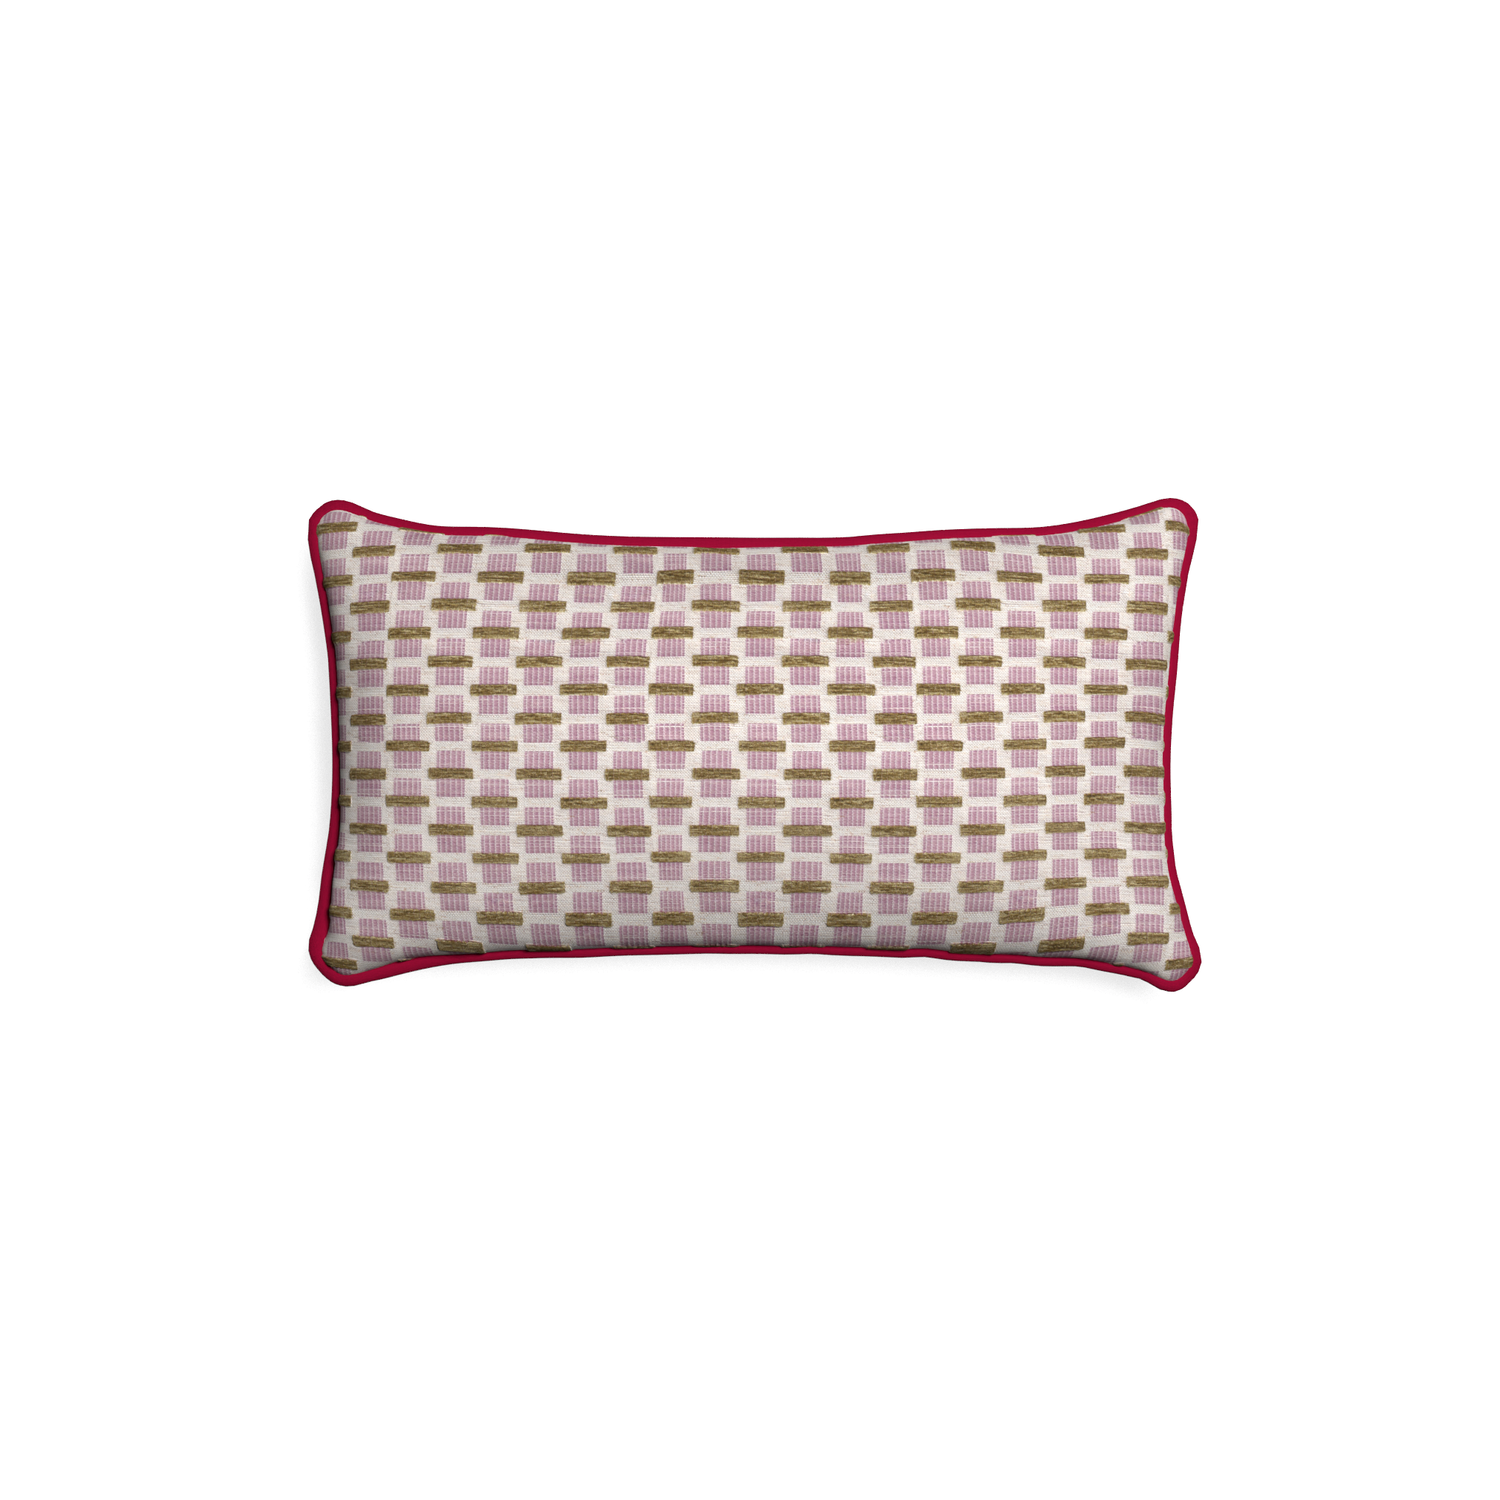 Petite-lumbar willow orchid custom pink geometric chenillepillow with raspberry piping on white background